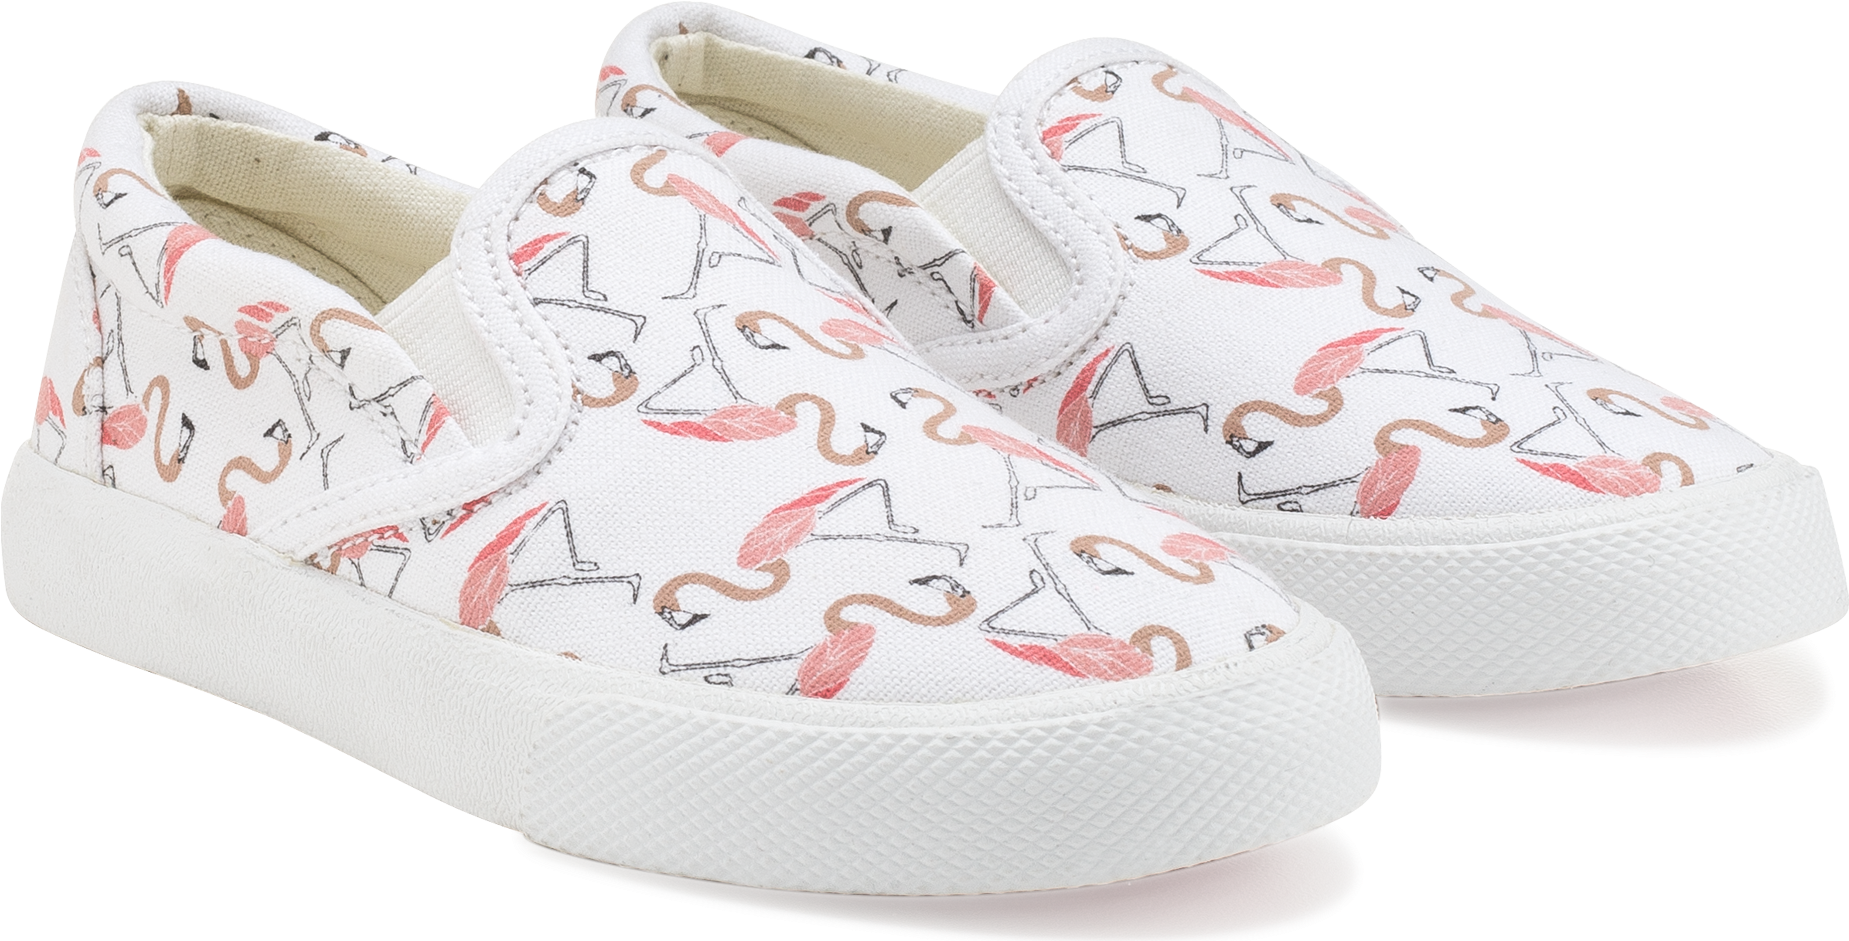 A Pair Of White Slip On Shoes With Flamingos On Them